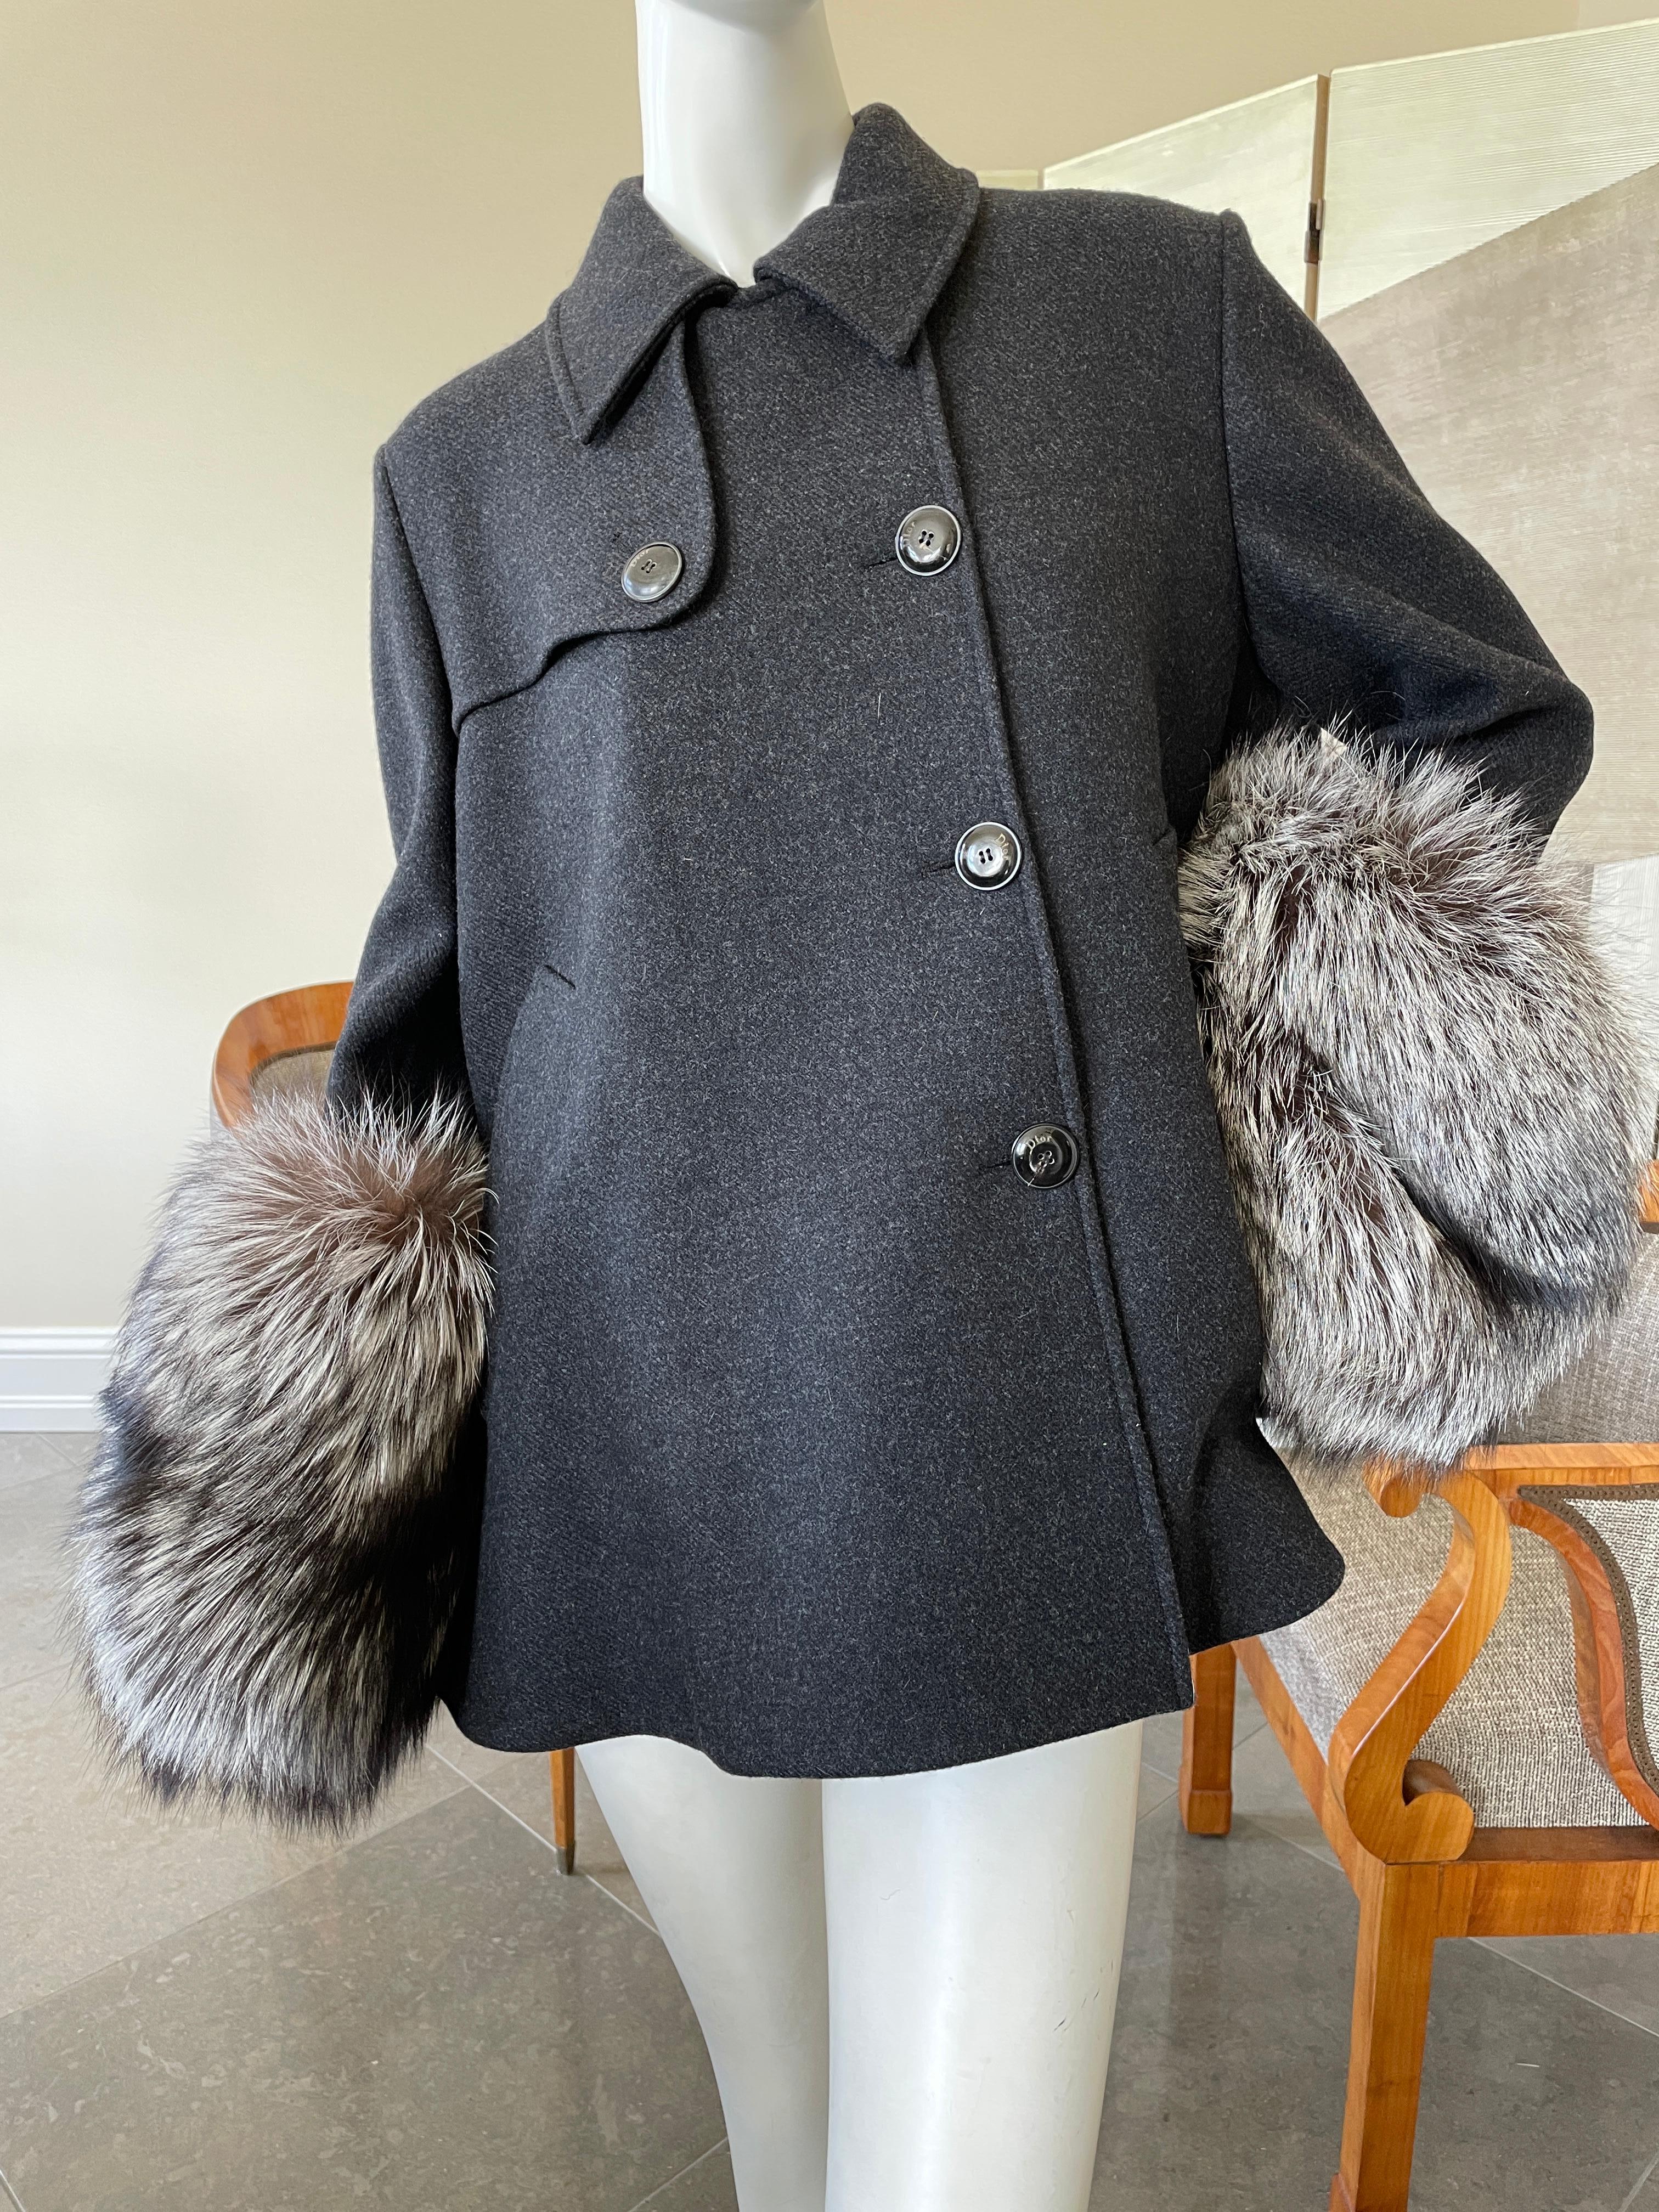 Christian Dior by Gianfranco Ferre Gray Peacoat with Extravagant Fox Fur Cuffs.
This is a very full swing style jacket. 
Size 40
Bust 42